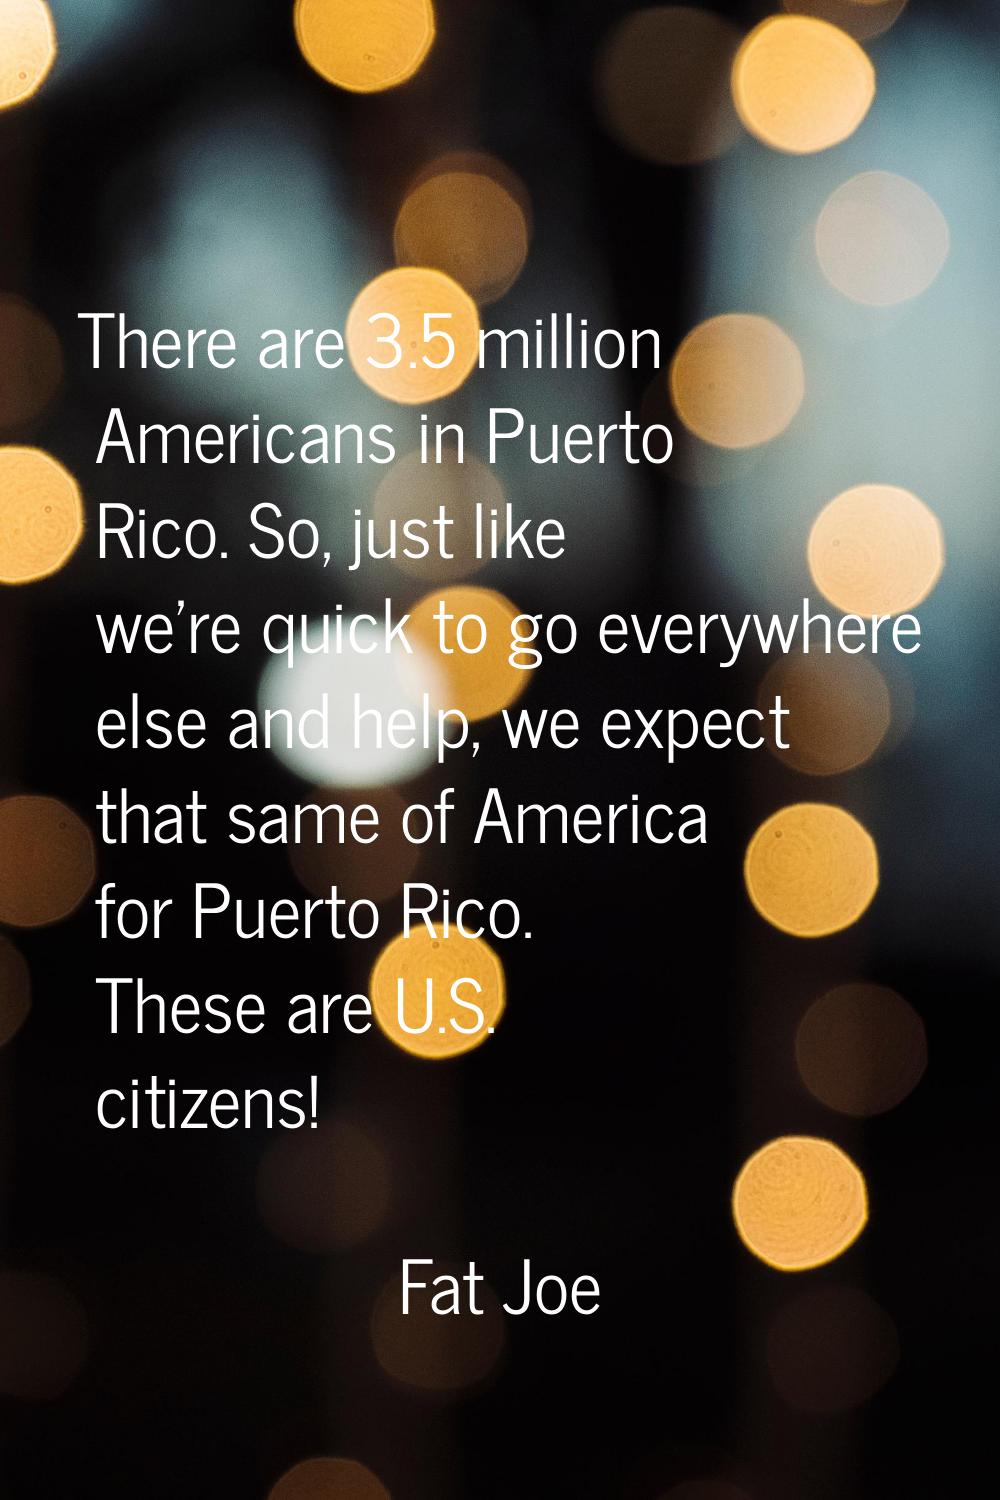 There are 3.5 million Americans in Puerto Rico. So, just like we're quick to go everywhere else and